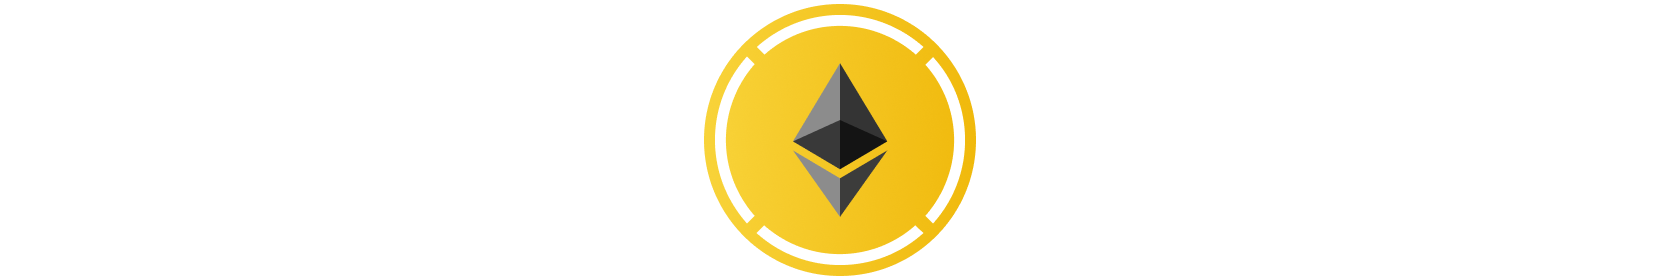 Staked ETH: 72k   Market share: 0.75%   30d change: +1.17%